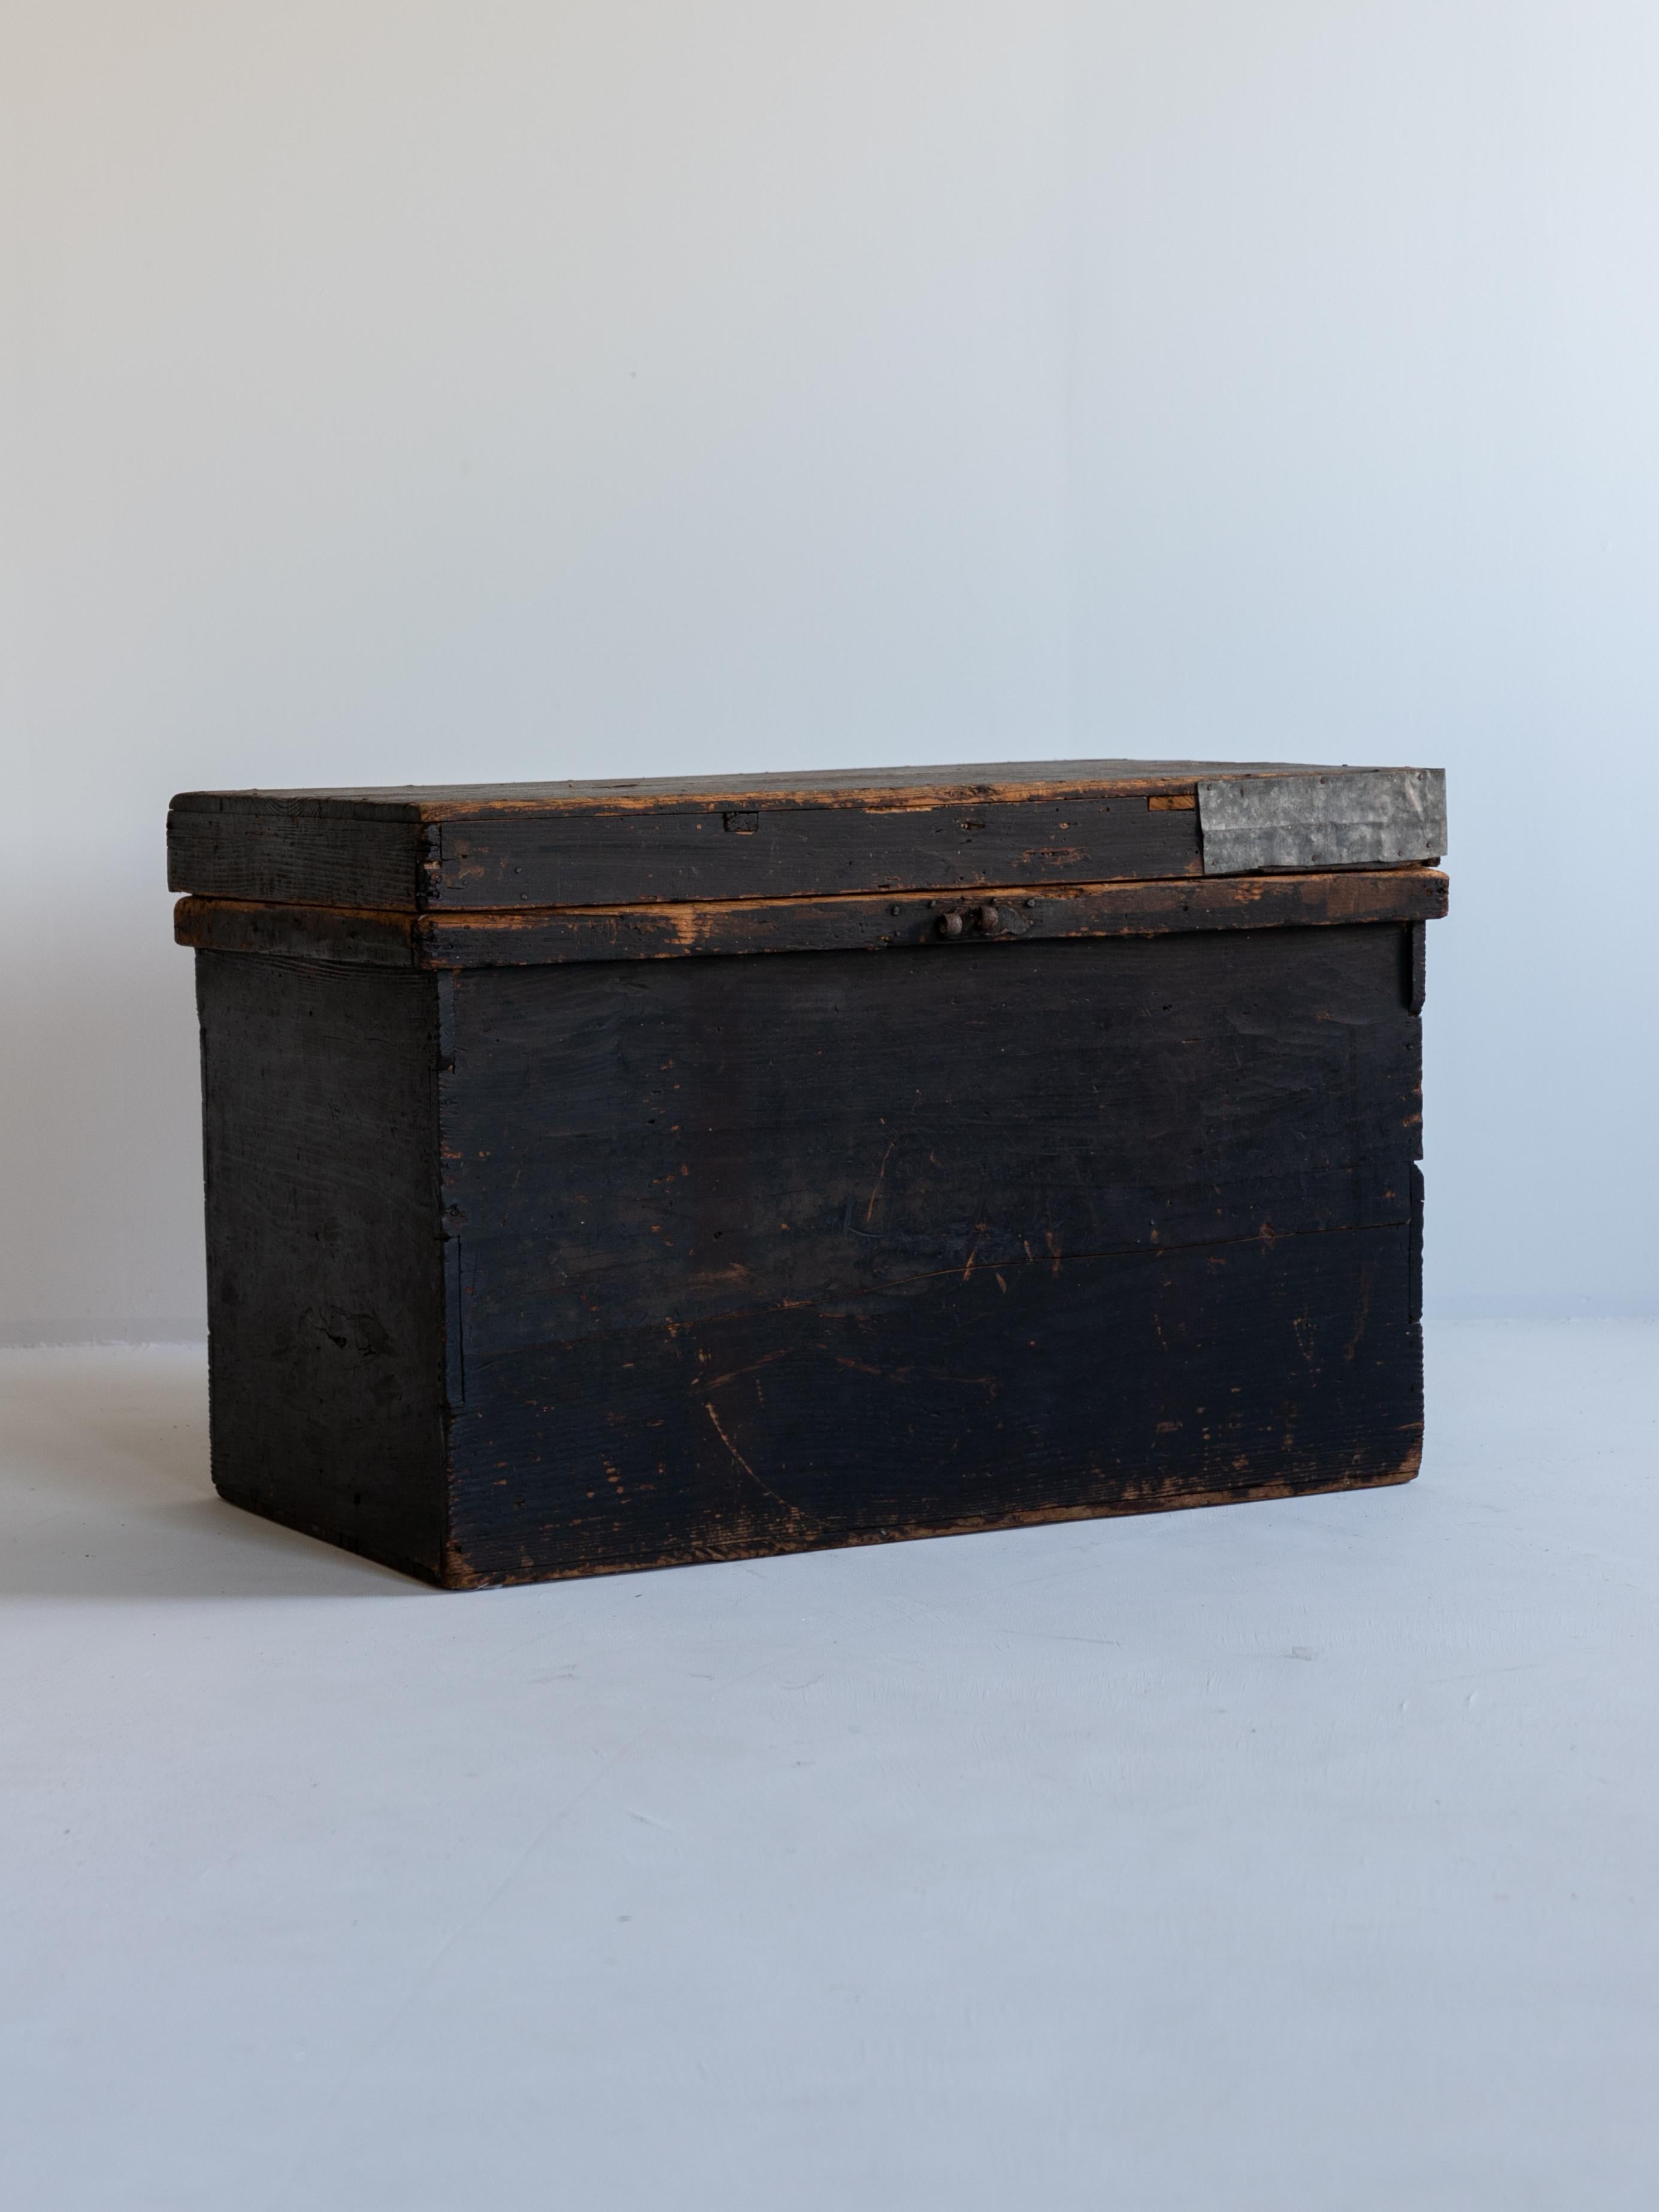 This is a very old Japanese black wooden box.
It is from the Meiji period (1860s-1900s).
The material is cedar.

It is a simple and beautiful box.
It is very rare.

It is as beautiful as an objet d'art just to put it on the table.
but it can